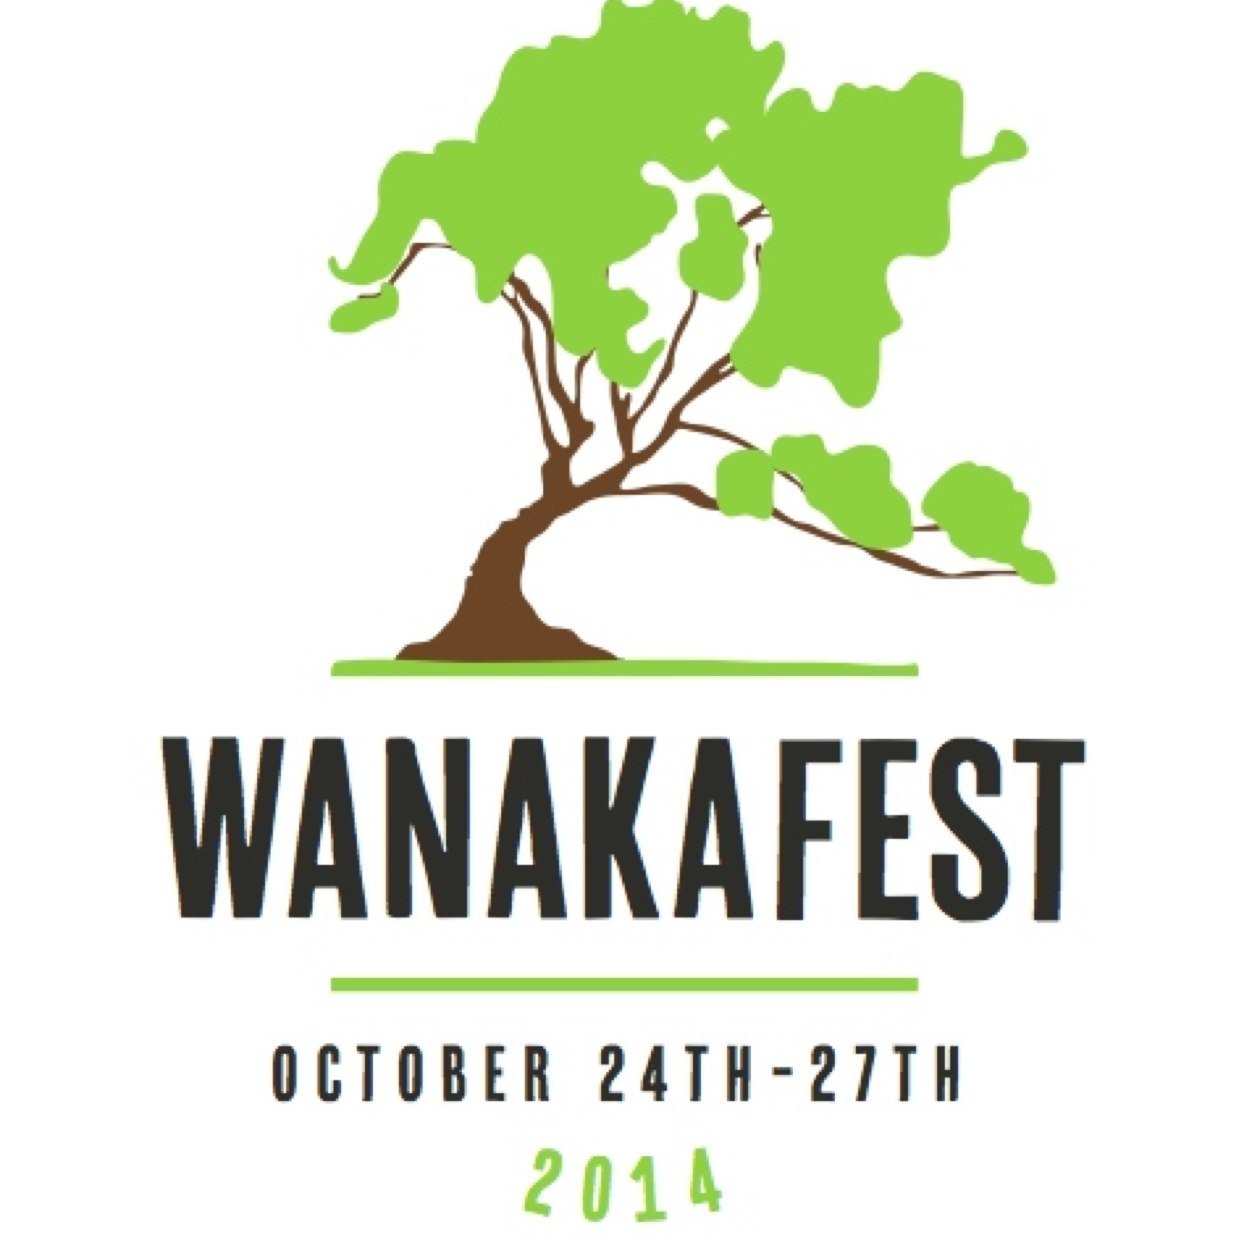 Wanakafest is a Wanaka's own community festival! This year the festival dates are October 24-27 2014.